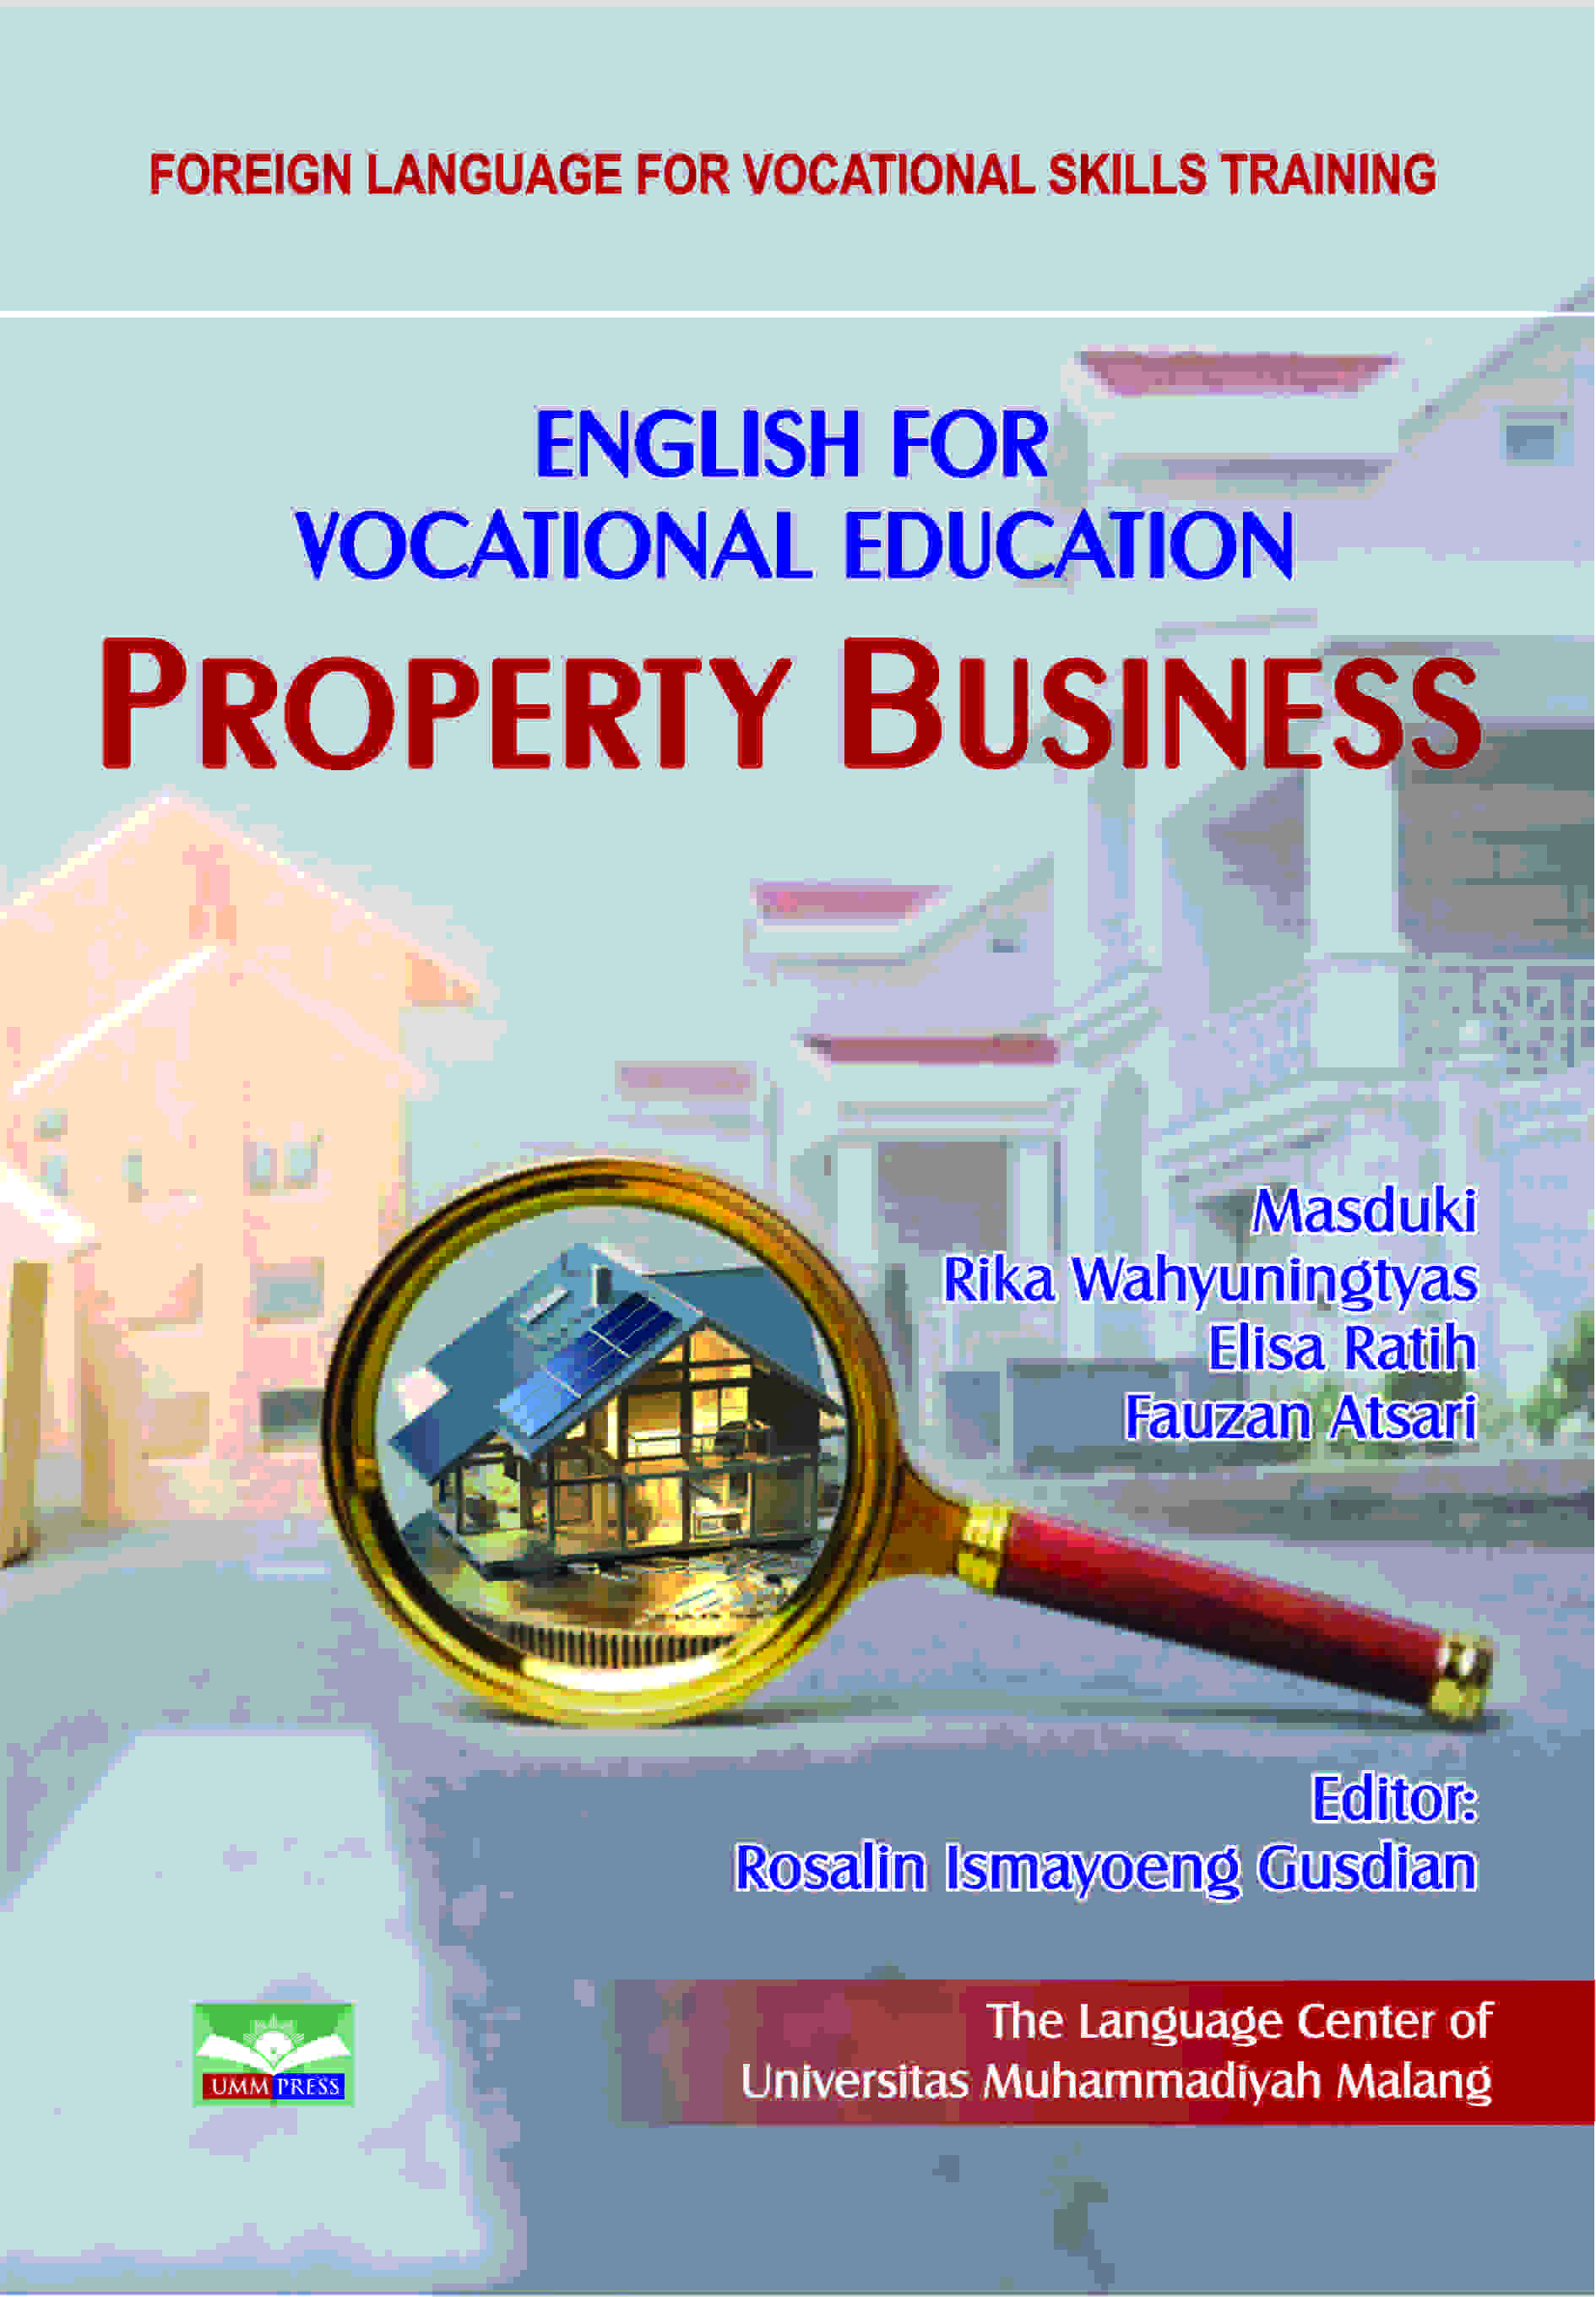 FLVST - ENGLISH FOR VOCATIONAL EDUCATION PROPERTY BUSINESS